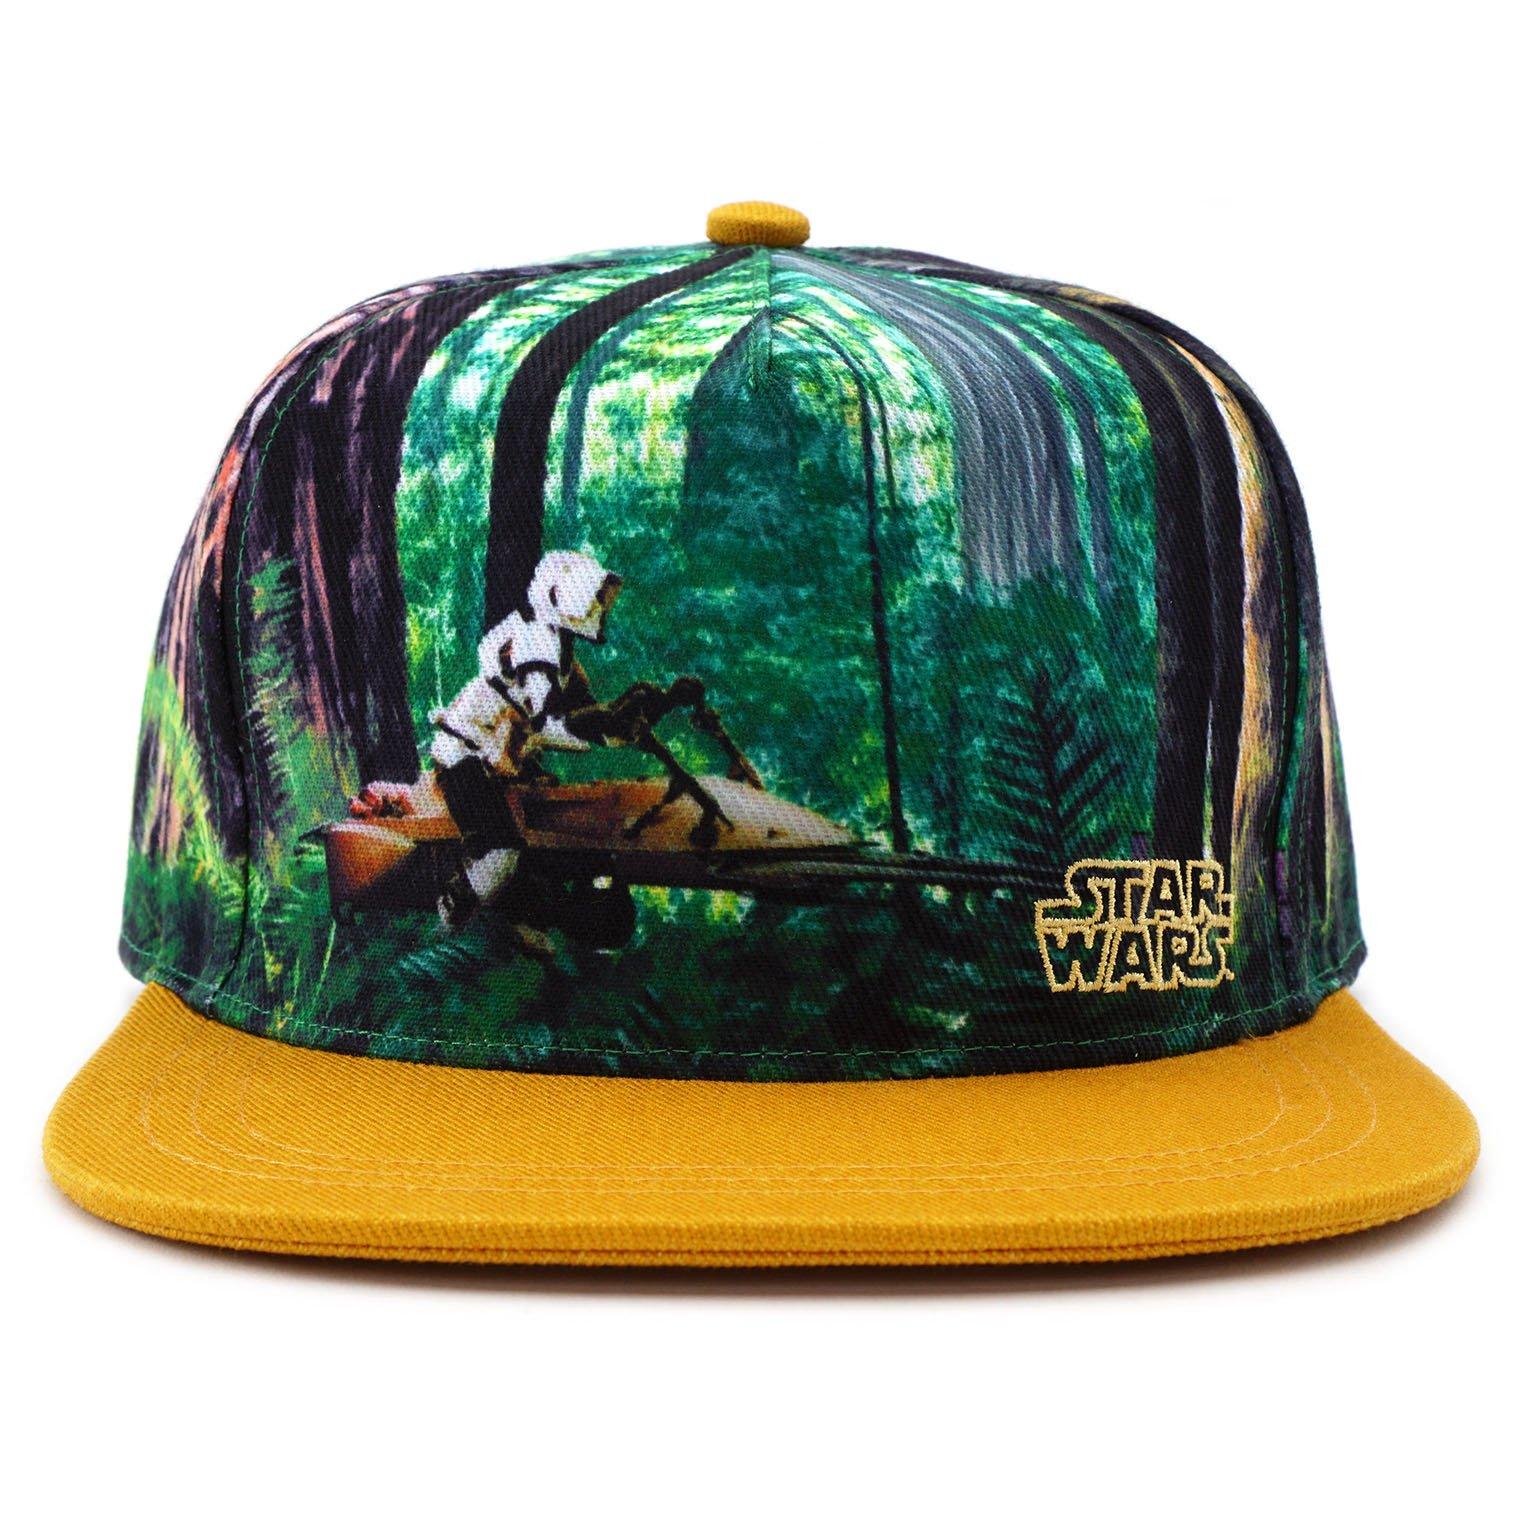 Shop Now For The Star Wars X Wing Baseball Cap Fandom Shop - awesome star wars hats roblox